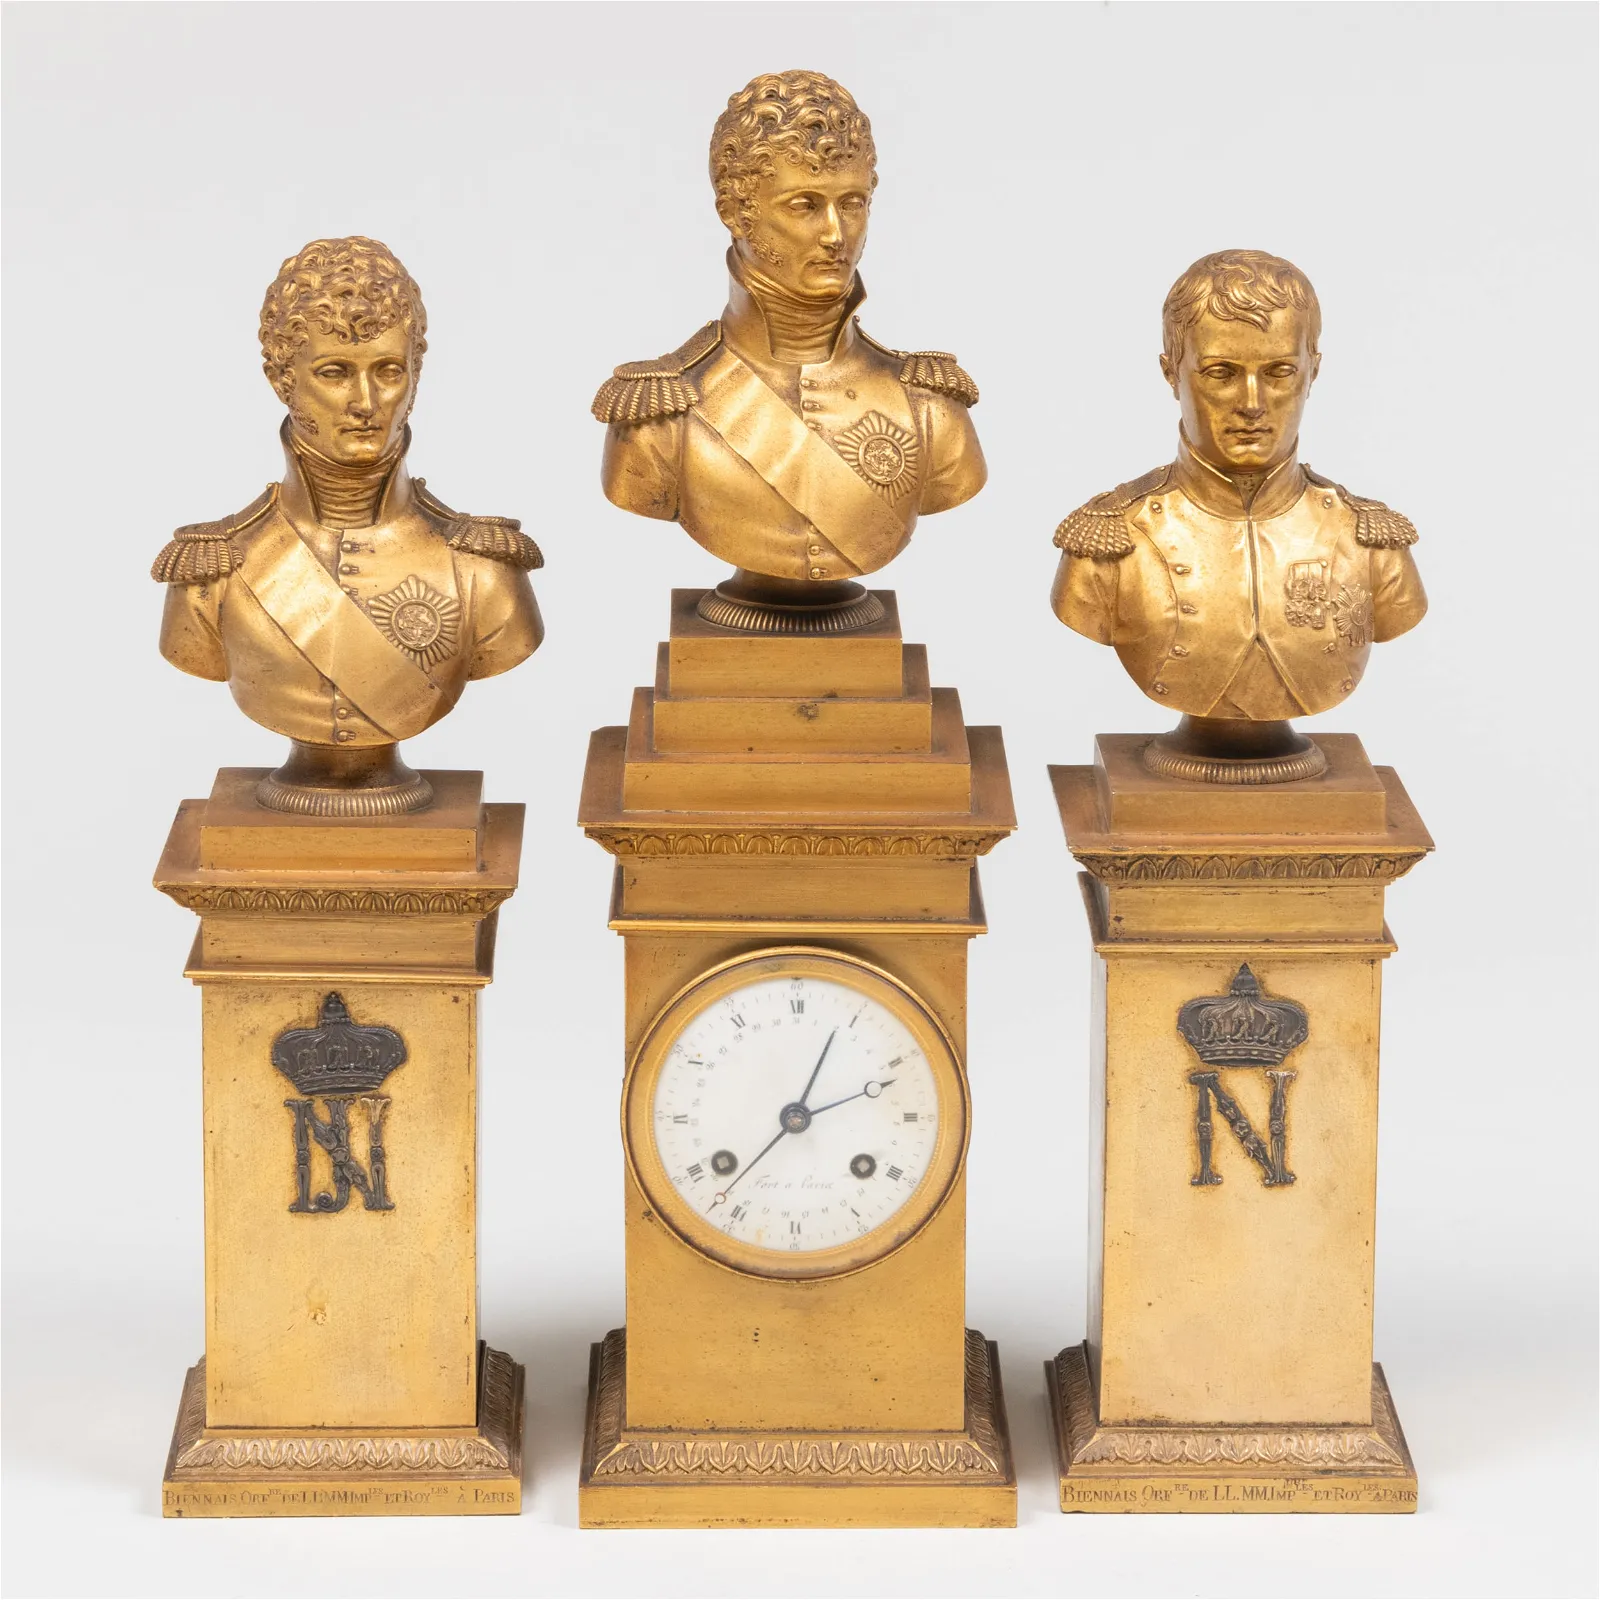 Trio of French Empire gilt bronzes by Napoleon&#8217;s goldsmith roared to $51K at Stair